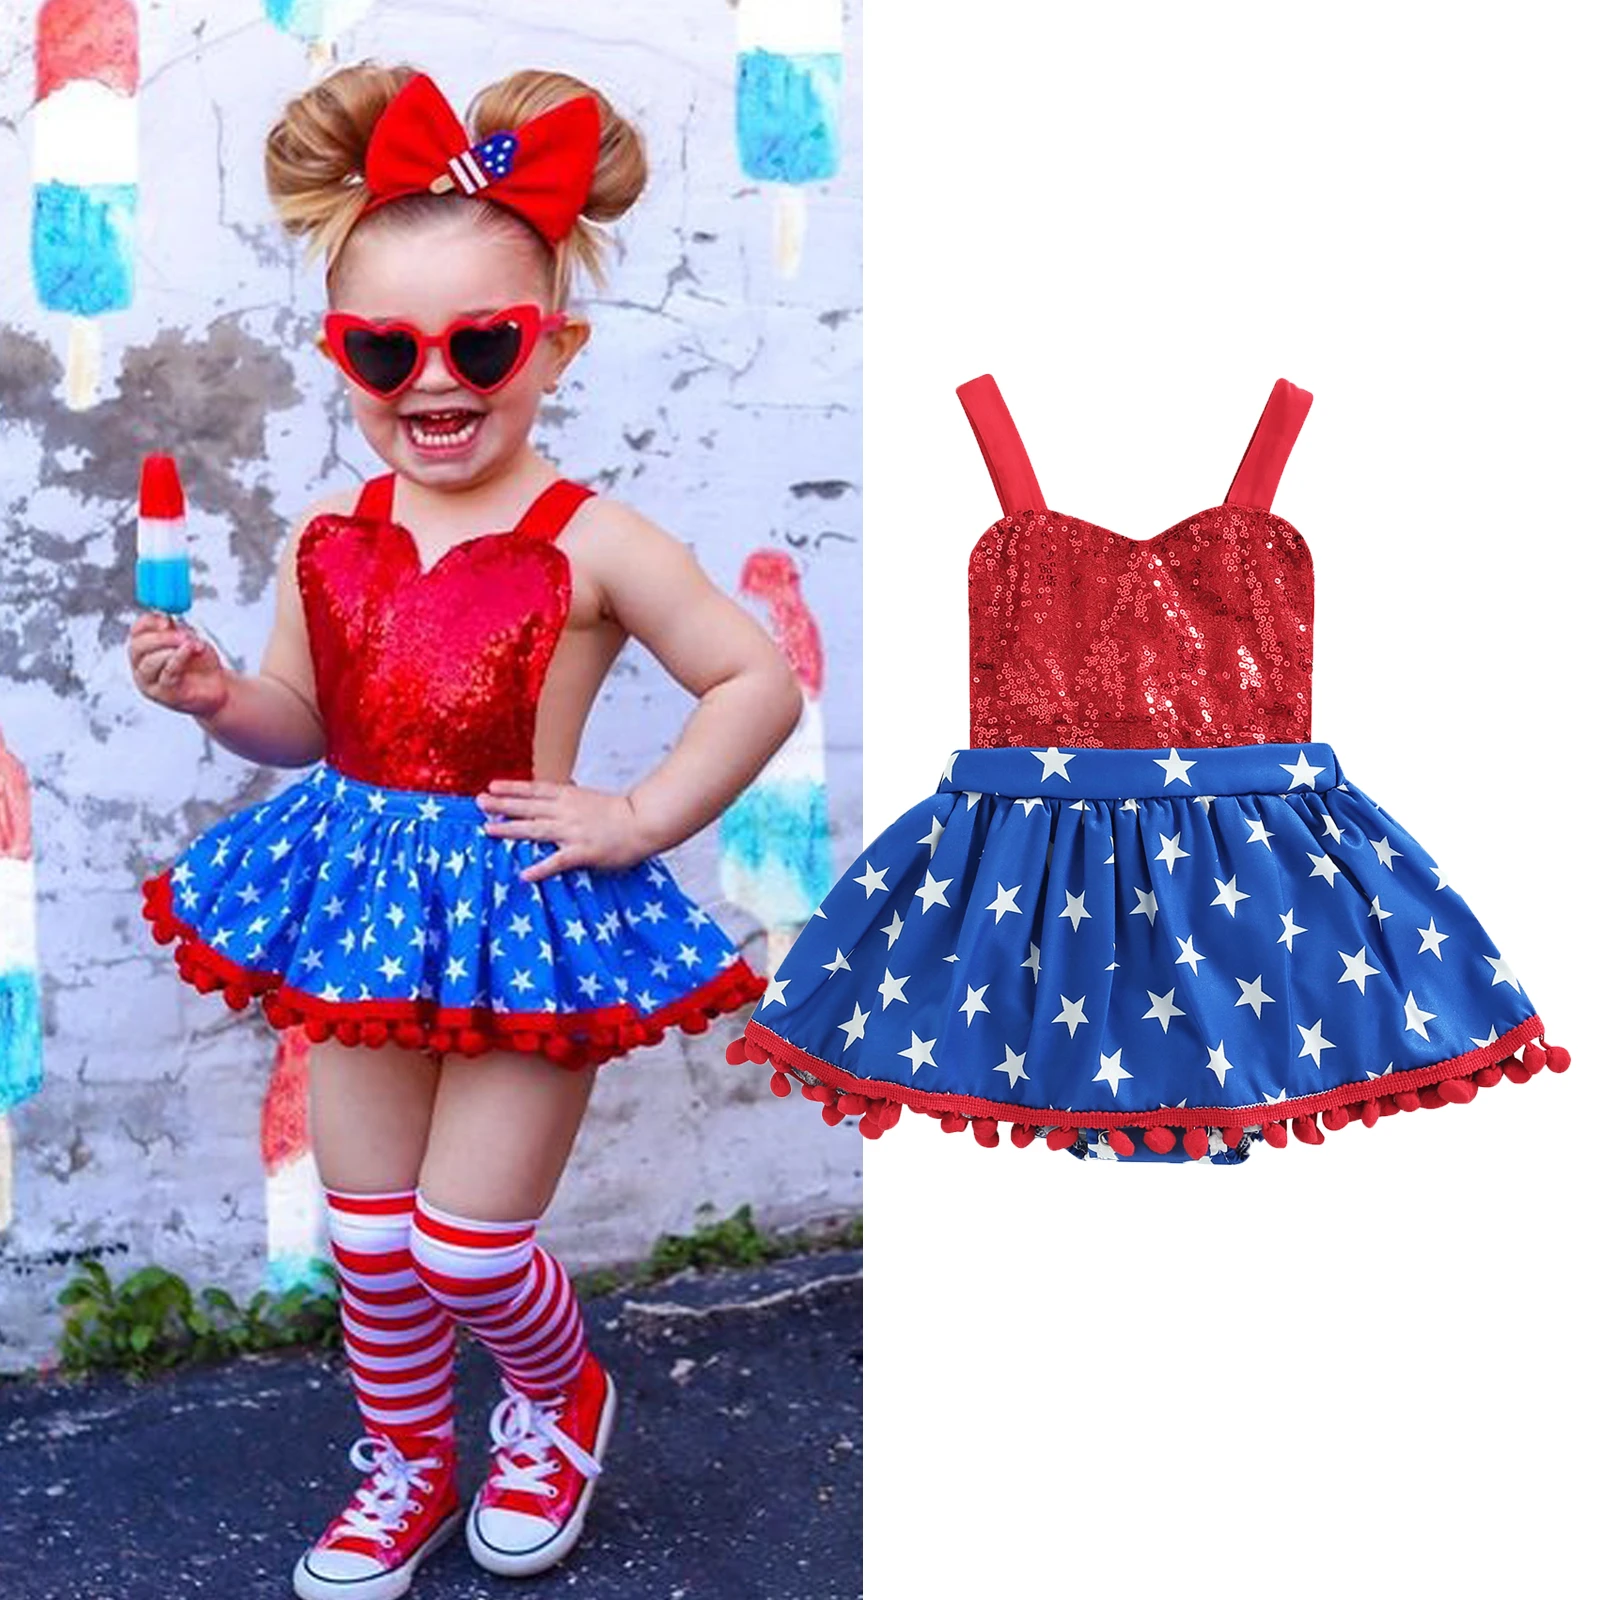 Baby Bodysuits for boy FOCUSNORM Independence Days Summer Baby Girls Cute Romper Dress 0-24M Sleeveless Sequined Star Printed Tutu Jumpsuits Baby Bodysuits medium